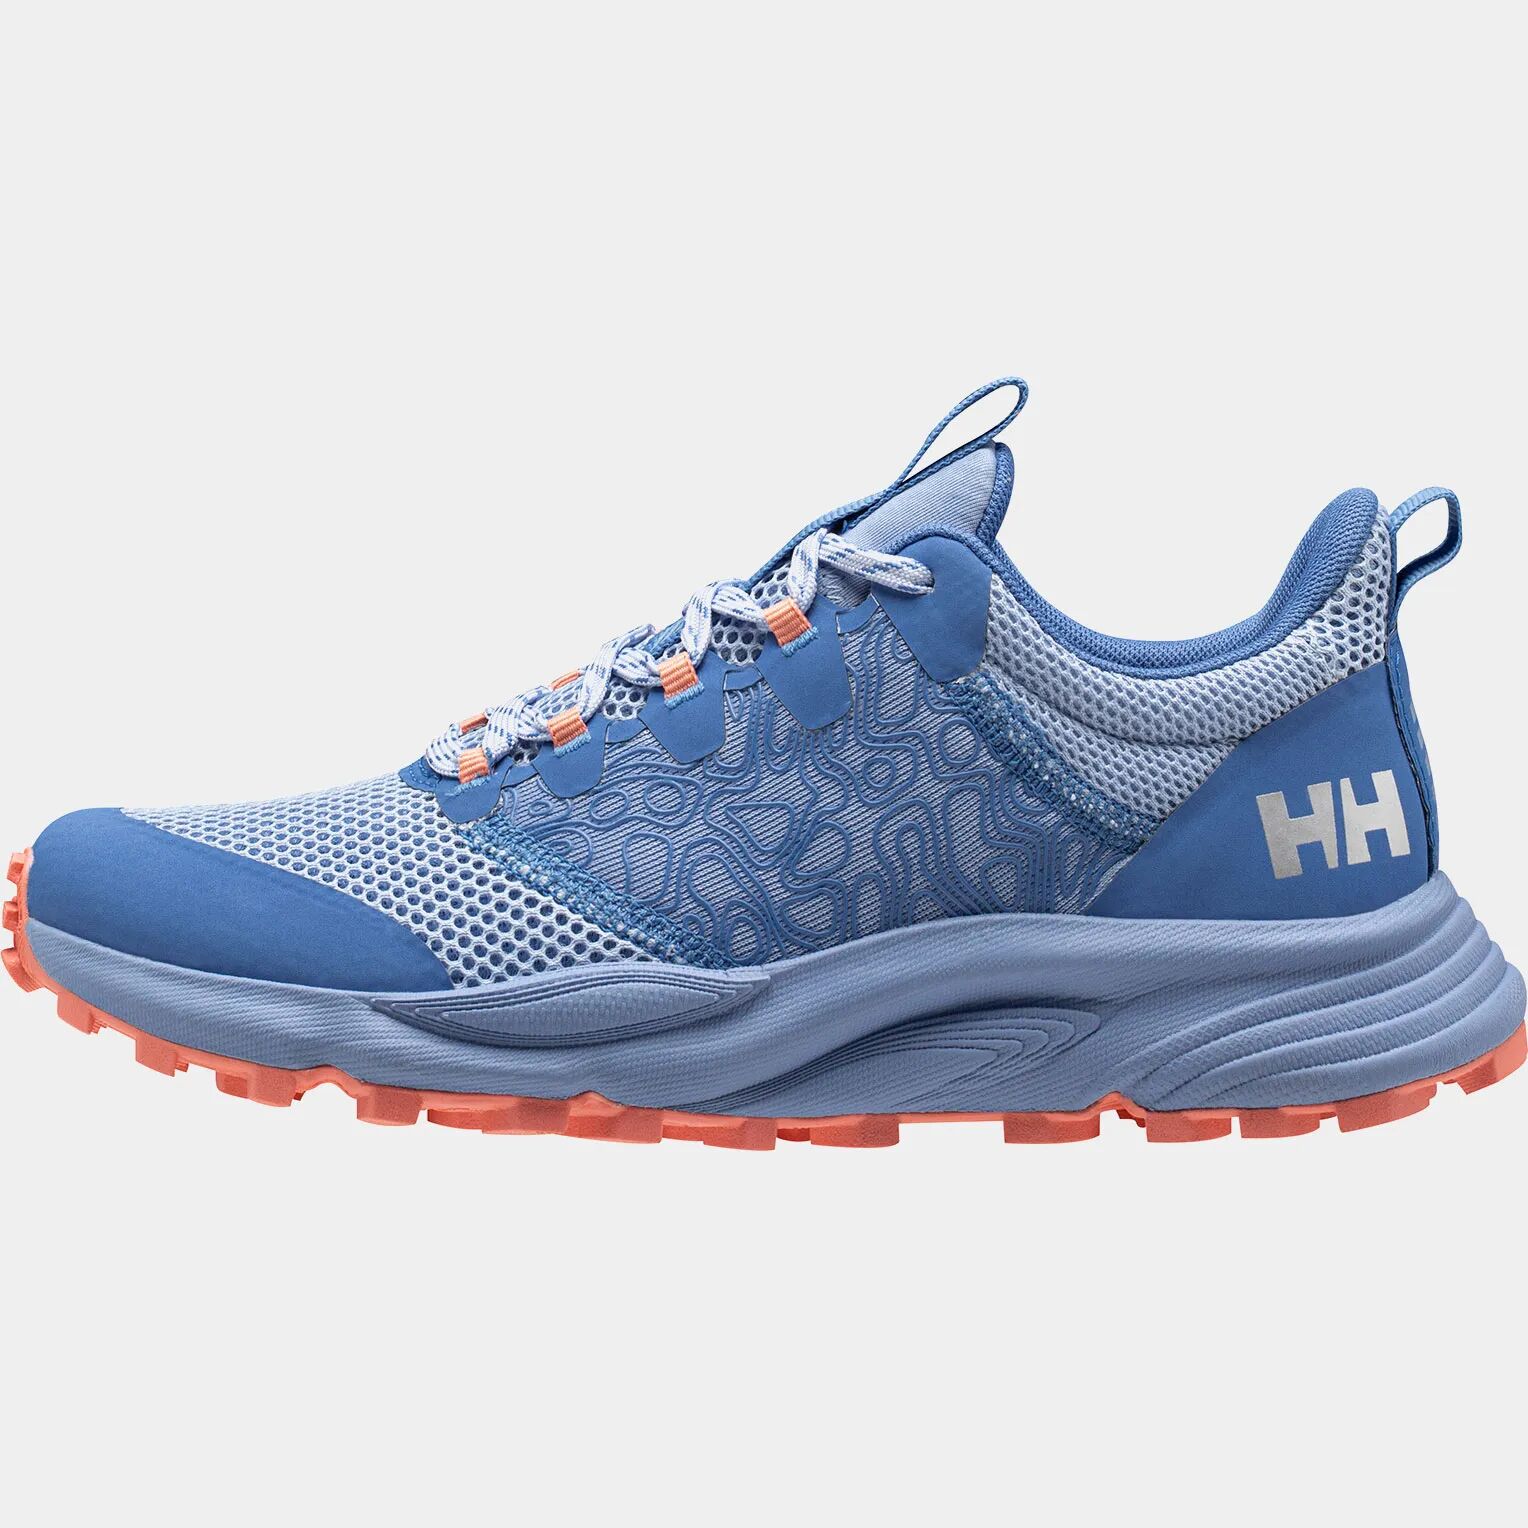 Helly Hansen Women's Featherswift Trail Running Shoes Blue 5.5 - Bright Blue - Female